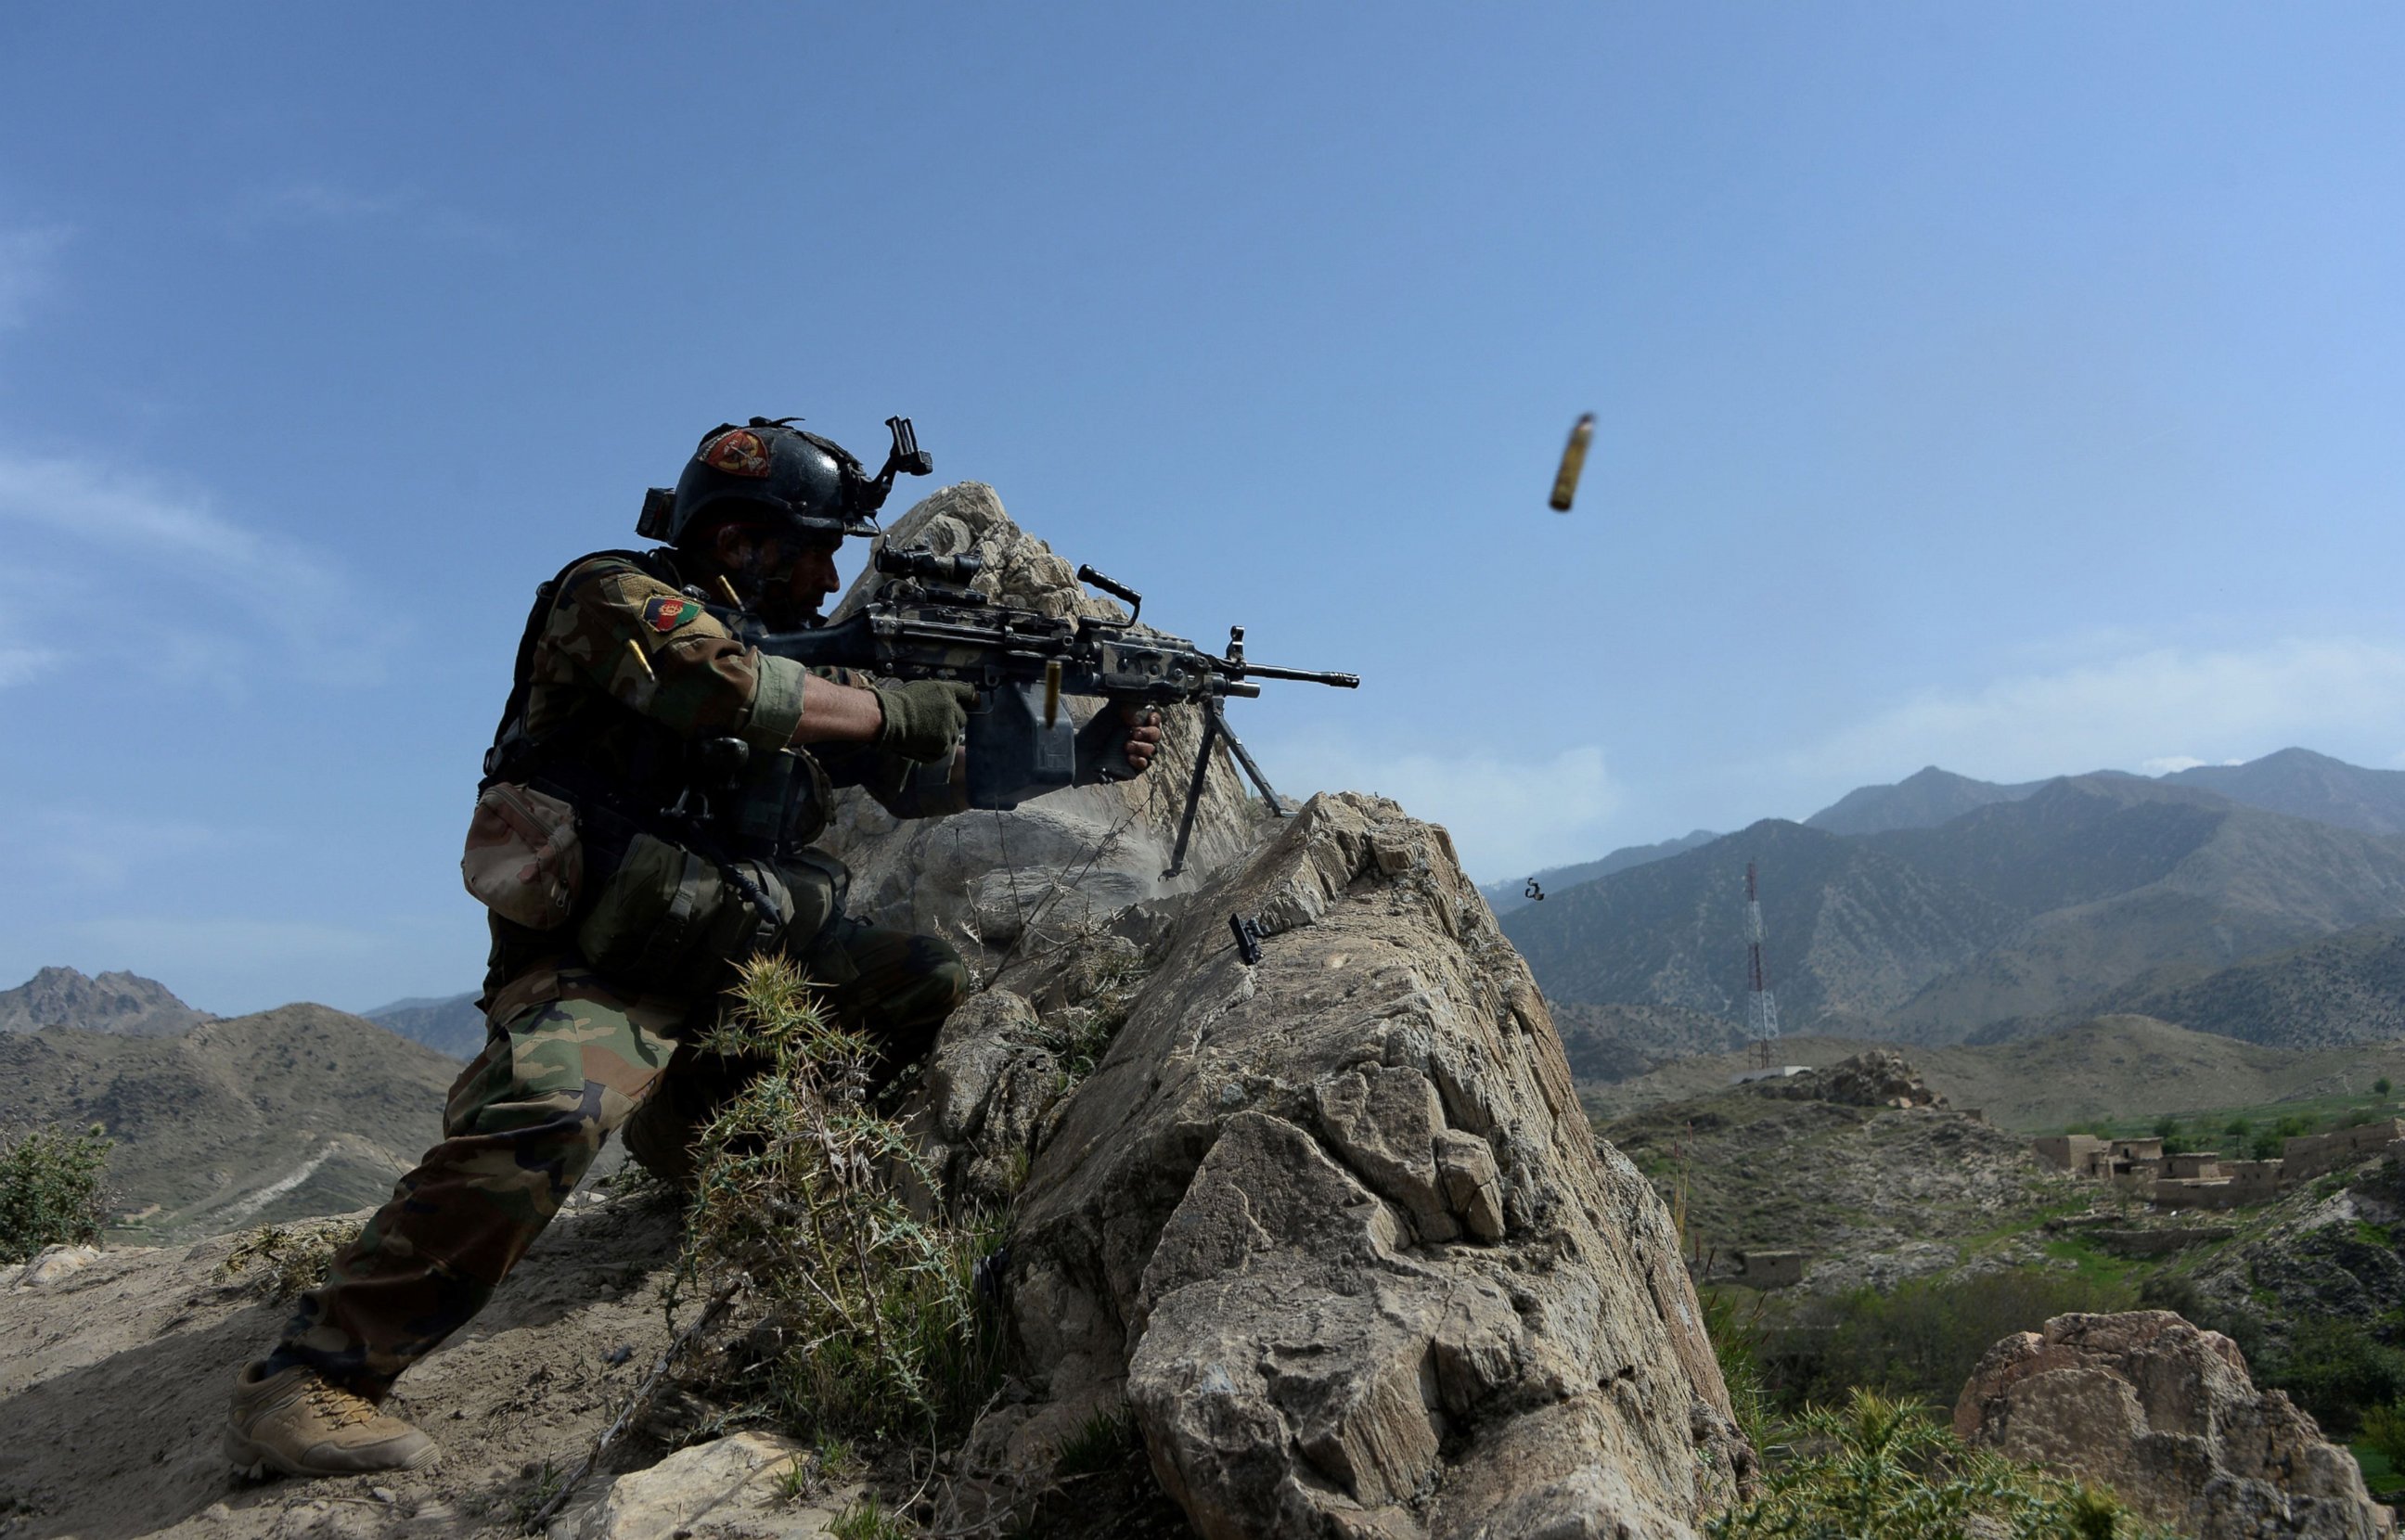 PHOTO: An Afghan security force personnel fires during an ongoing an operation against Islamic State (IS) militants in the Achin district of Nangarhar province, April 11, 2017.